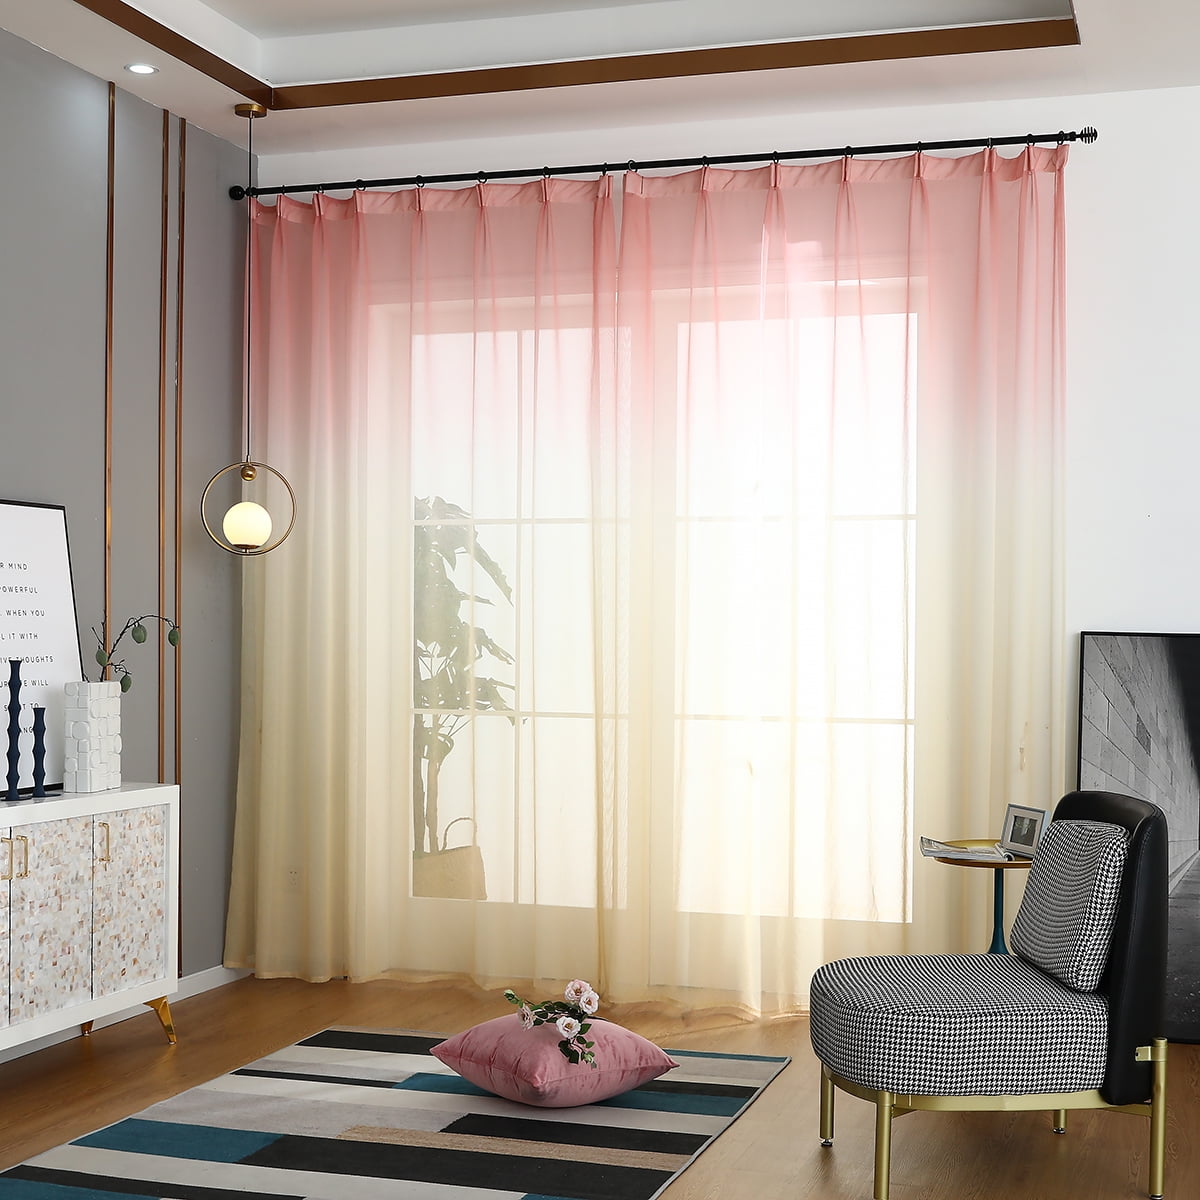 Details about   1/2/4 Panels Window Screening Tulle Drap Voile Valance Ombre Curtains Home Decor 